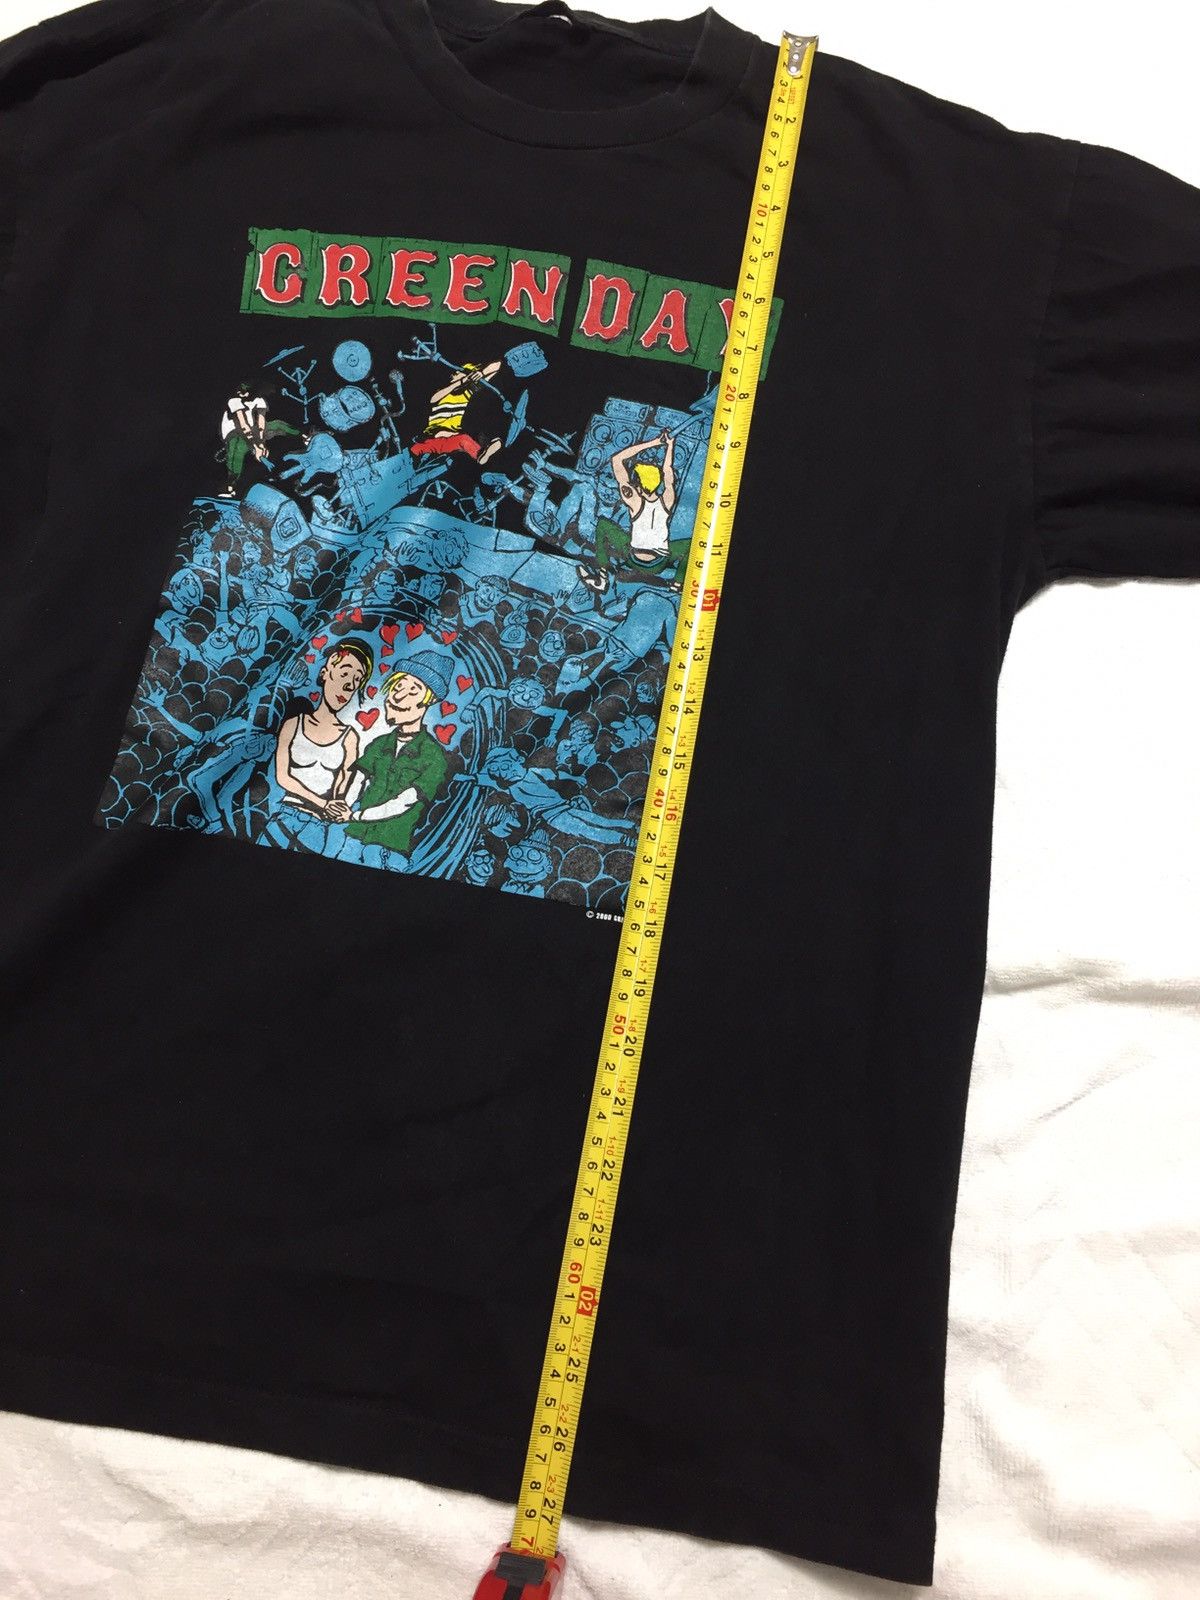 Vintage 2000 Green Day Band Tees - 10